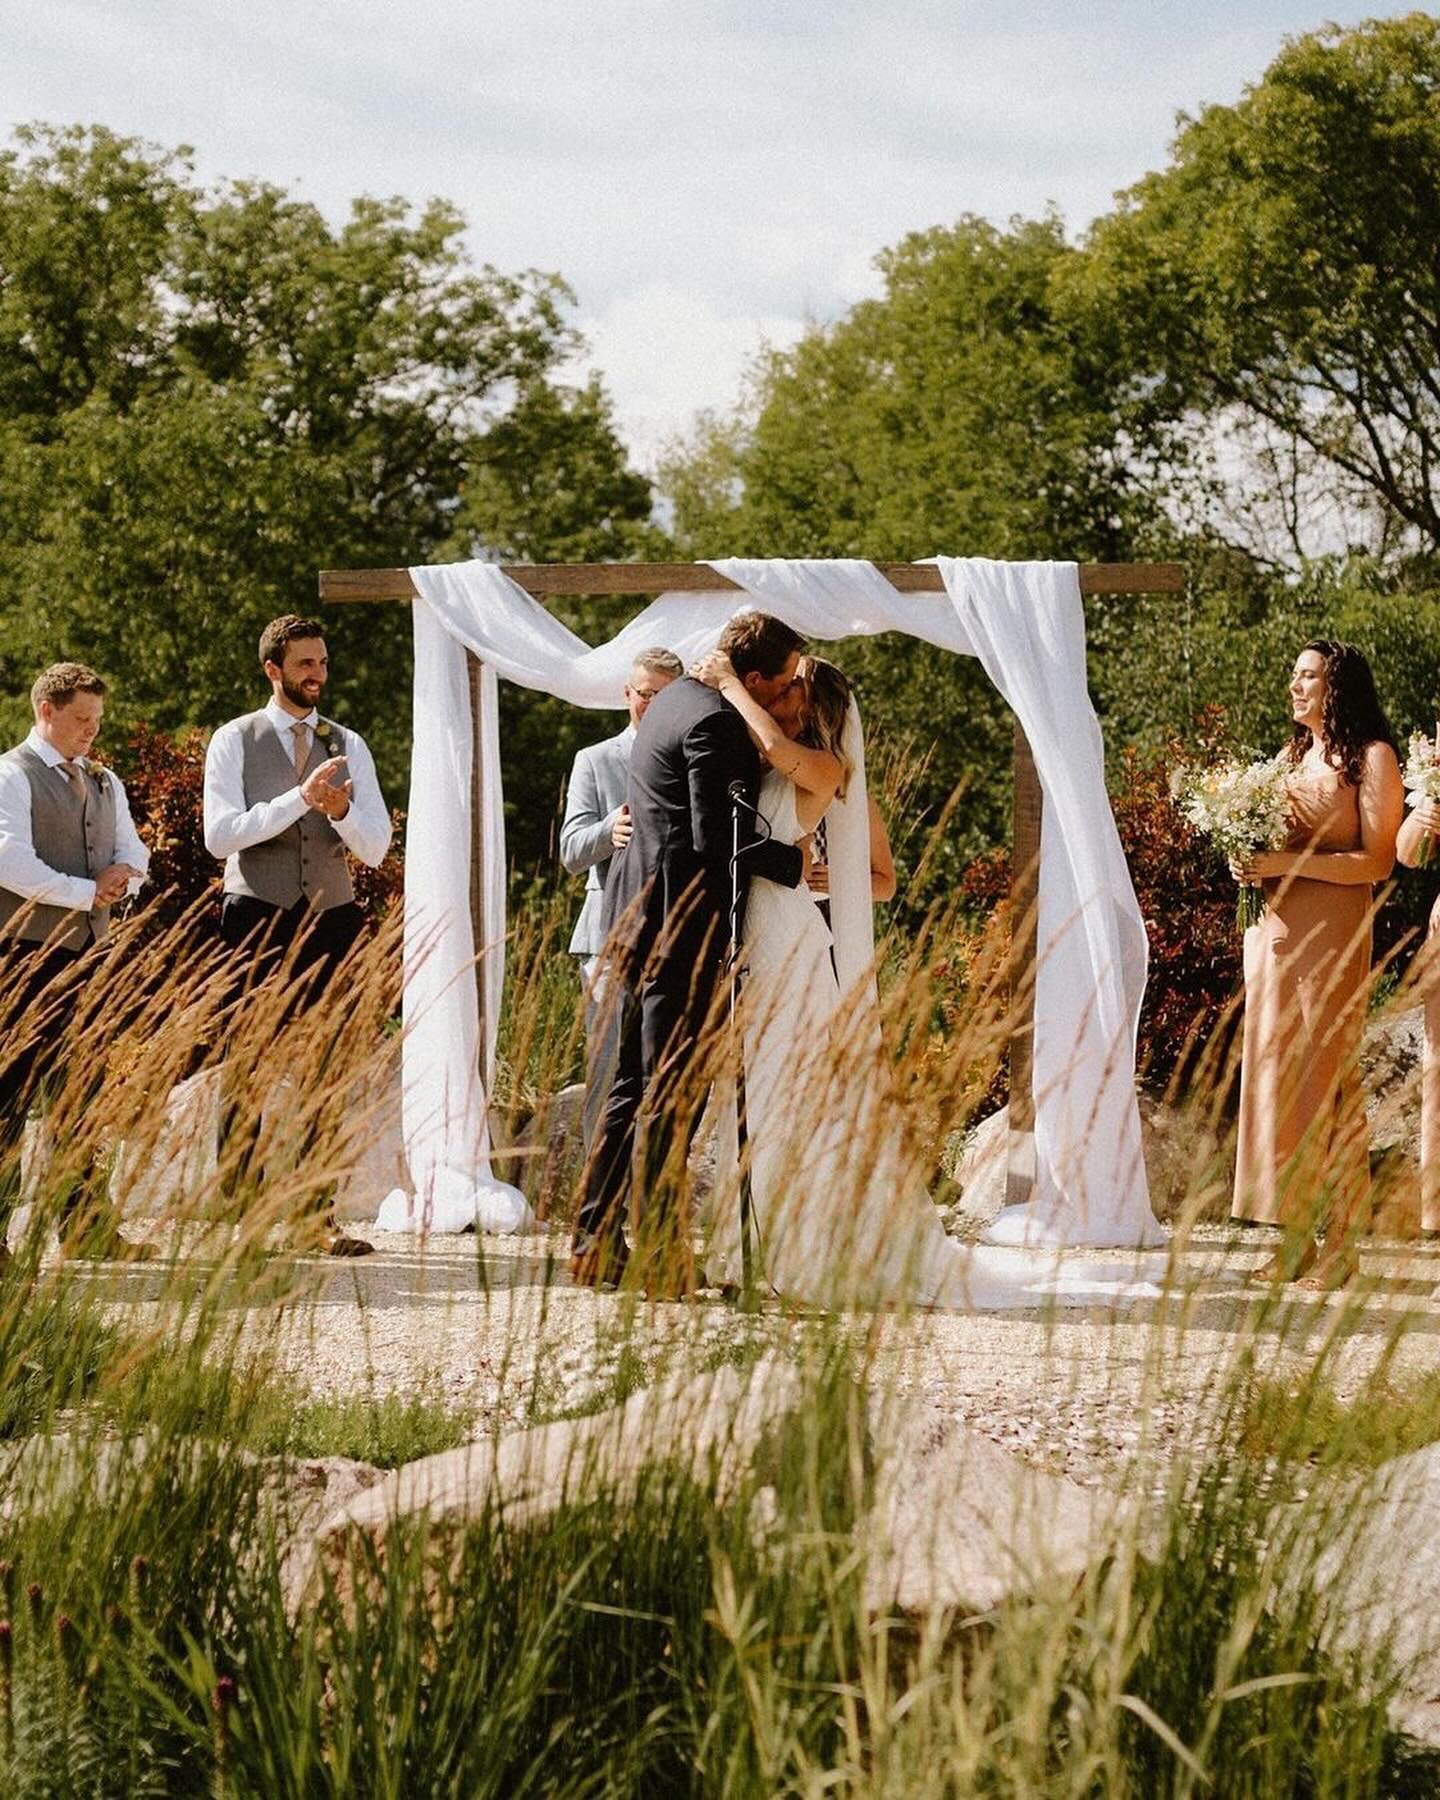 Ceremony magic🤝Hawthorn Marriage Hill 

We've designed our ceremony grounds to ensure that all guests can witness the most intimate part of your wedding. Having the option to host the ceremony on-site is a major factor that gives our couples peace o